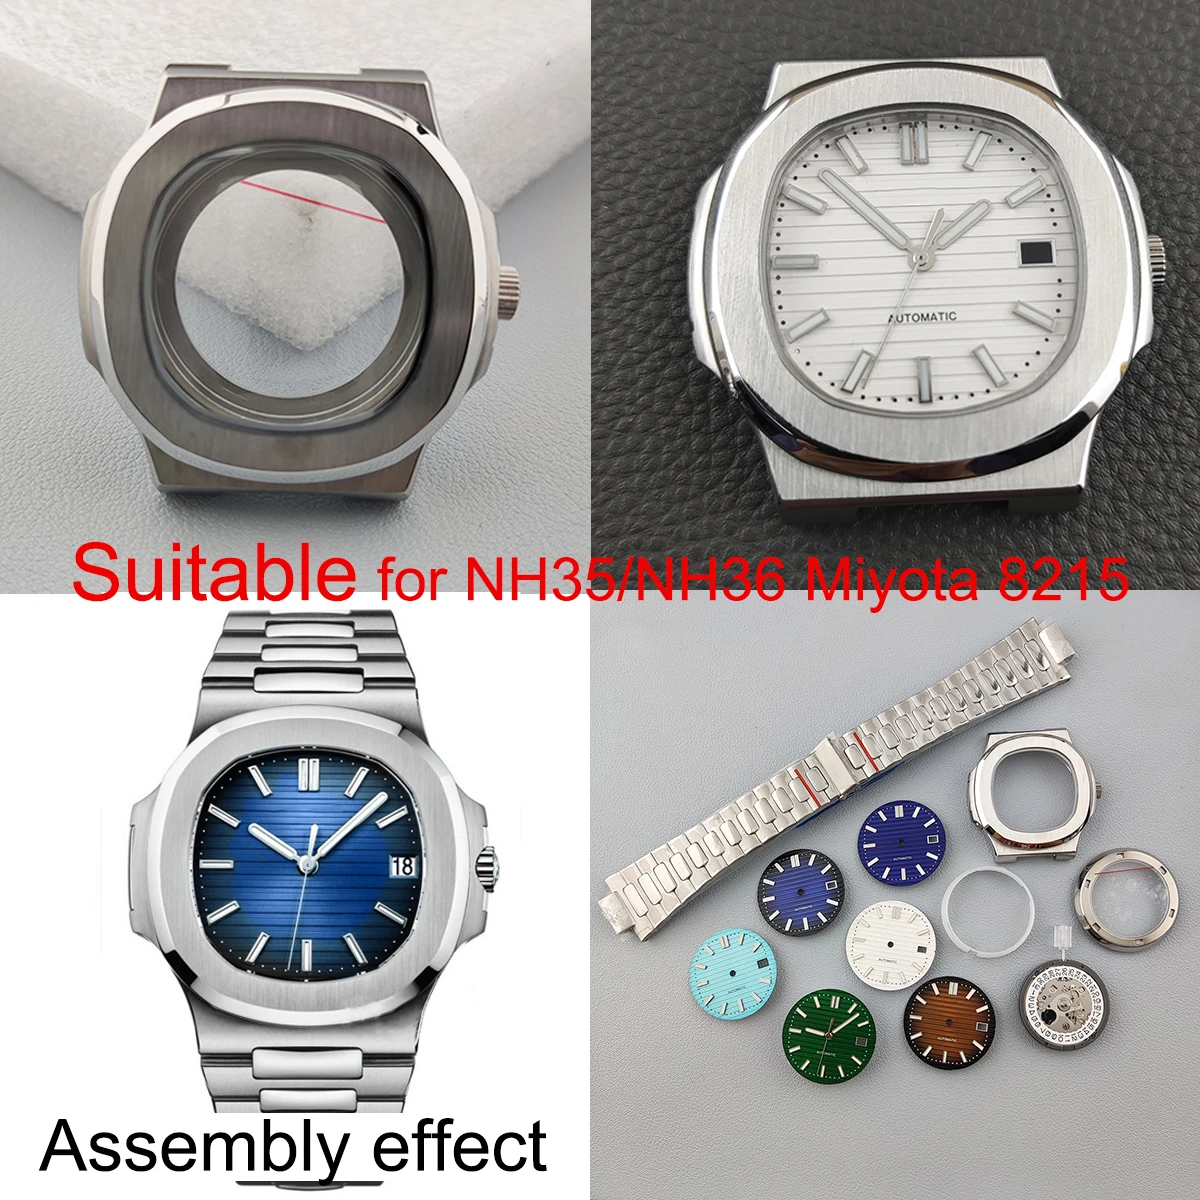 41mm NH35 Dail NH35 Case Super Luminous Dial With S Dial Hands Stainless Steel For NH36 Miyota8215 Movement Watch Accessories